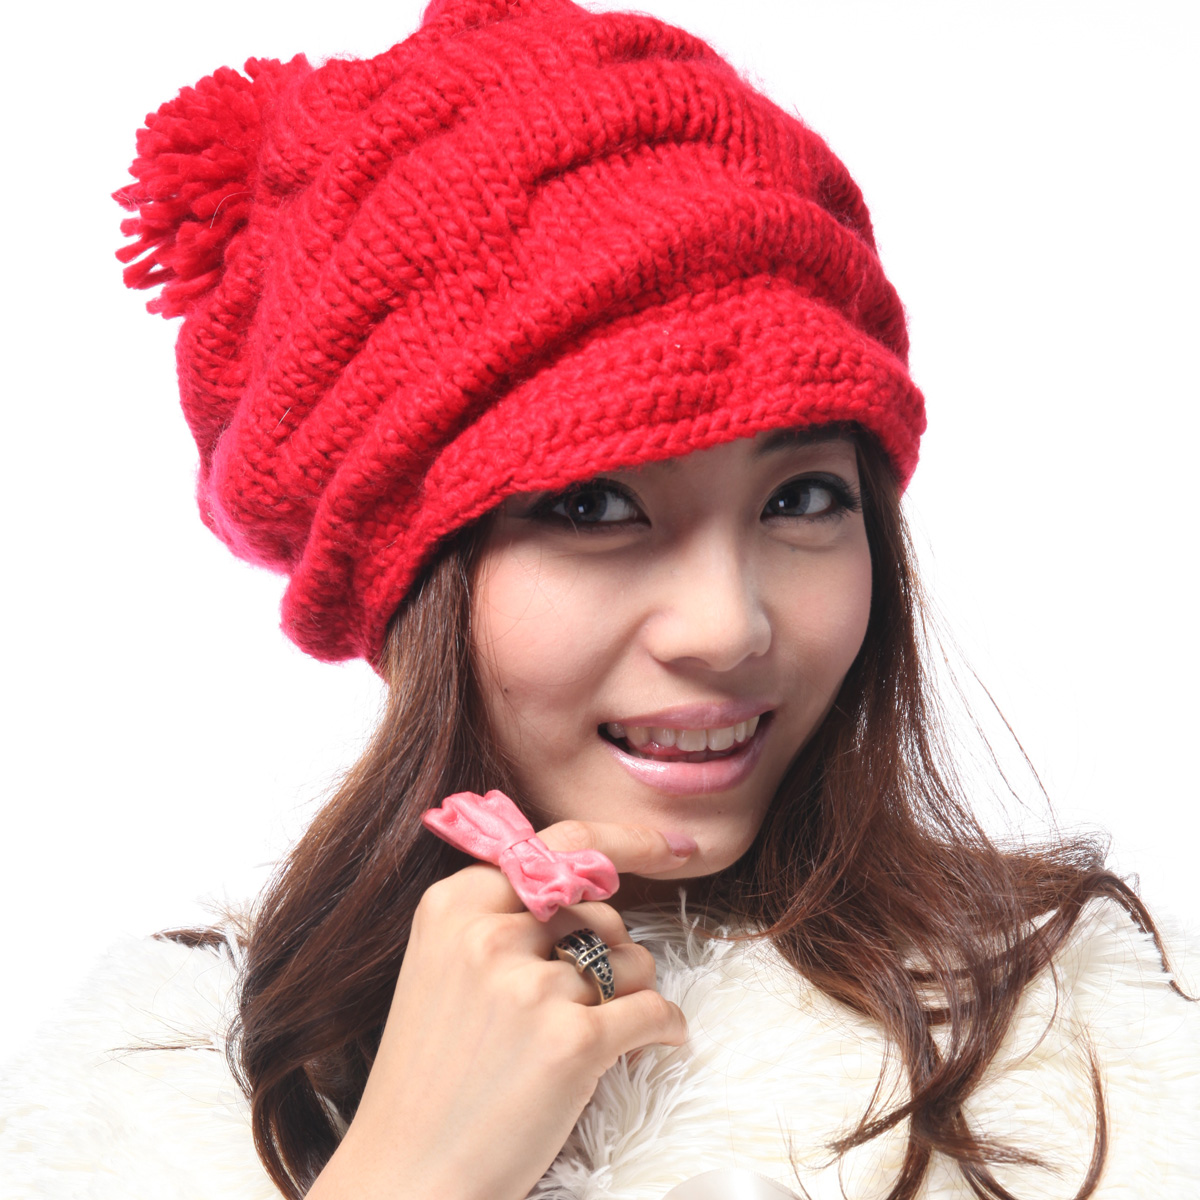 free shipping, Topcul knitted hat, yarn towel ball cap, women's knitted pleated